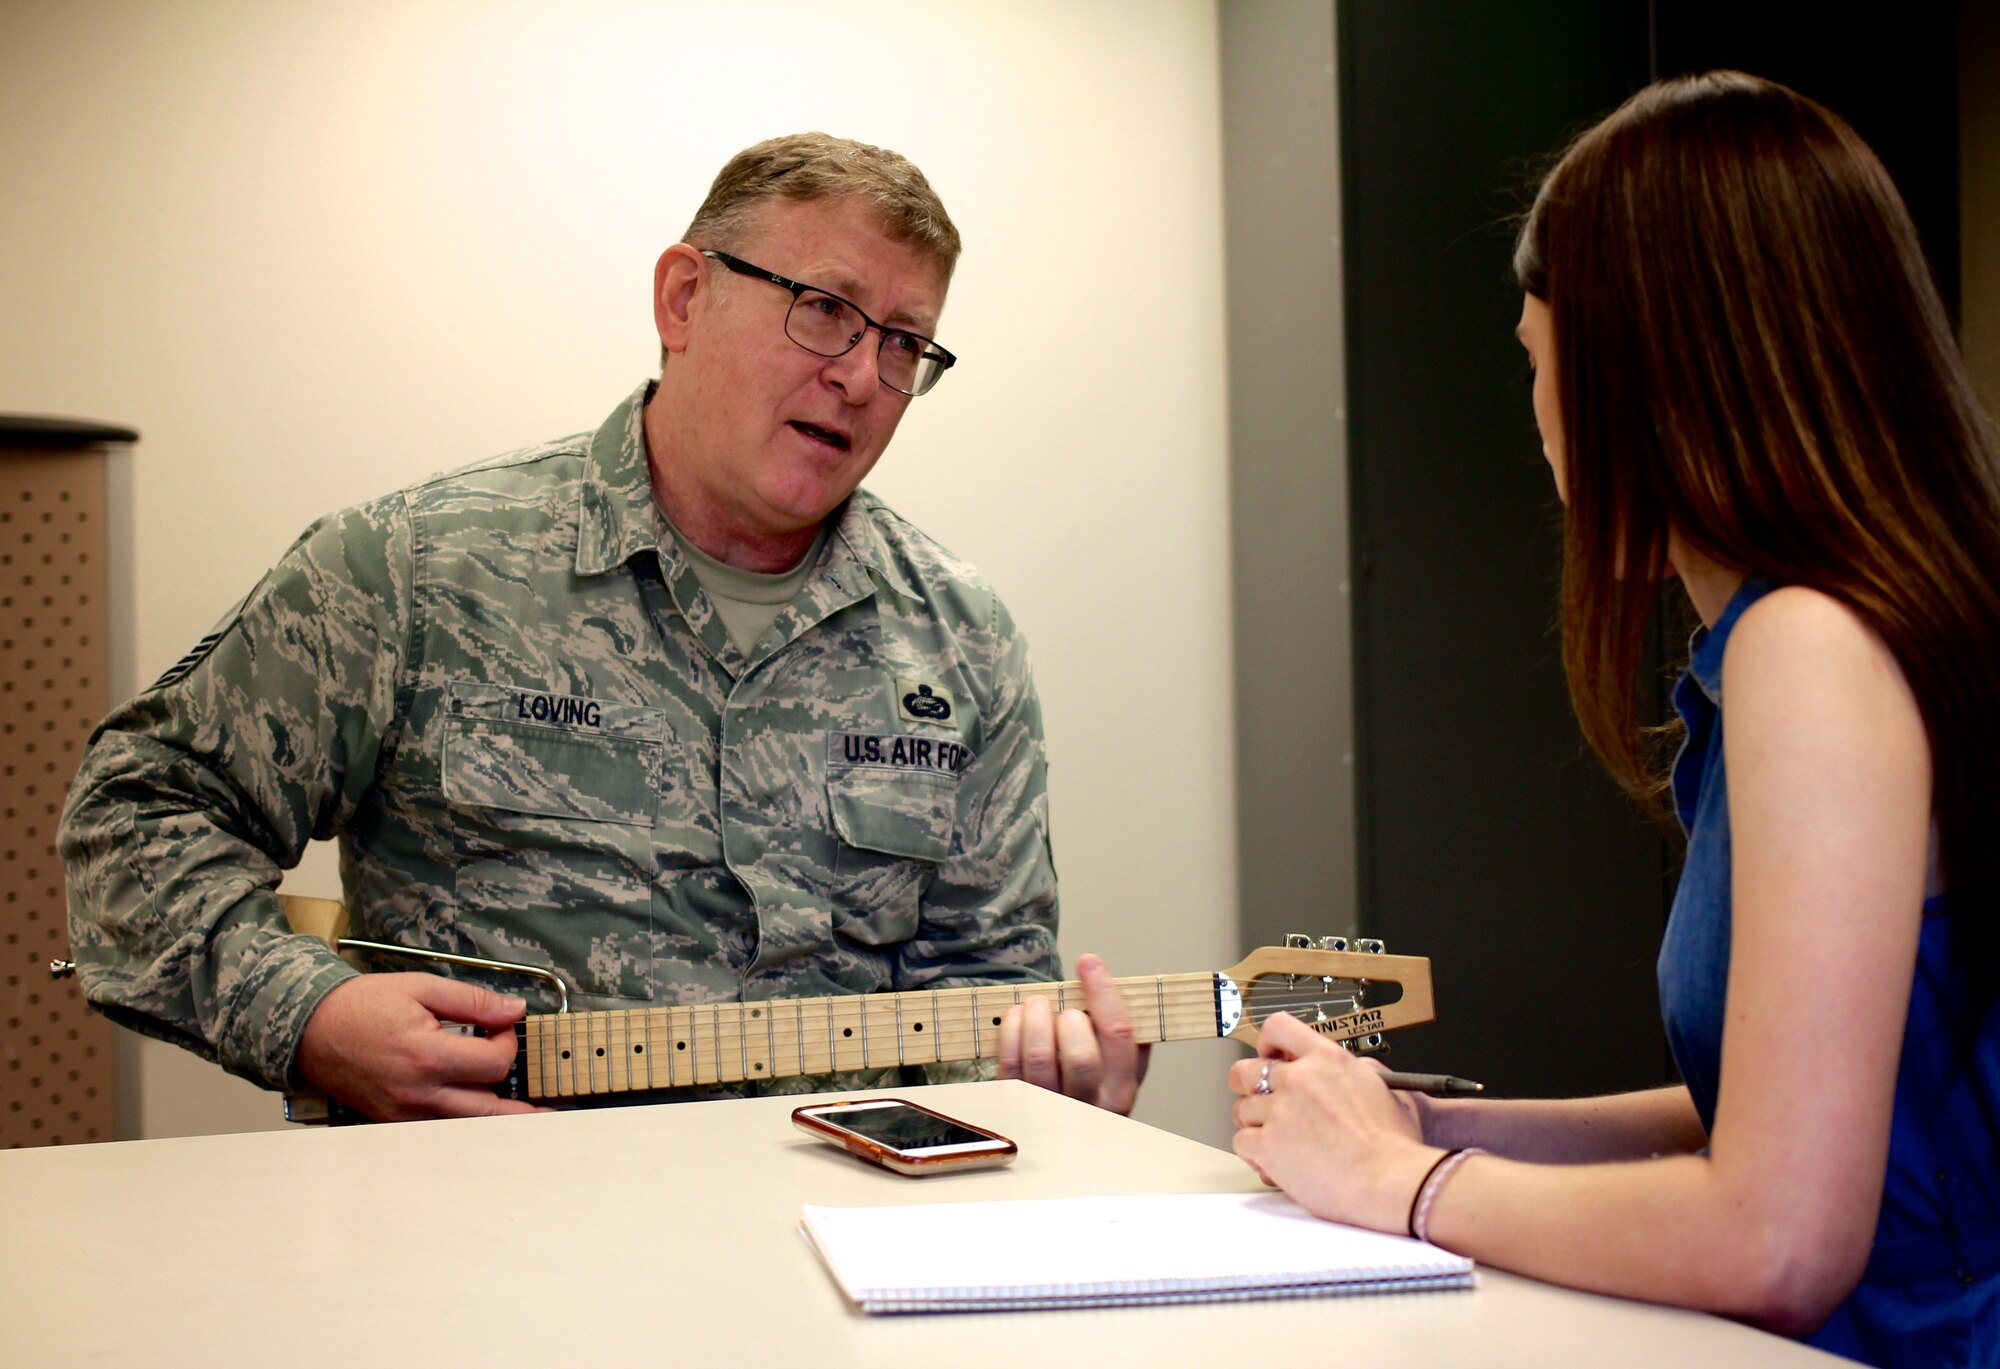 Master Sgt. Tony Loving plays a song while interviewer Kayla Prather listens and asks him questions on his work in 932nd Force Support Squadron.  (U.S. Air Force photo by Lt. Col. Stan Paregien)